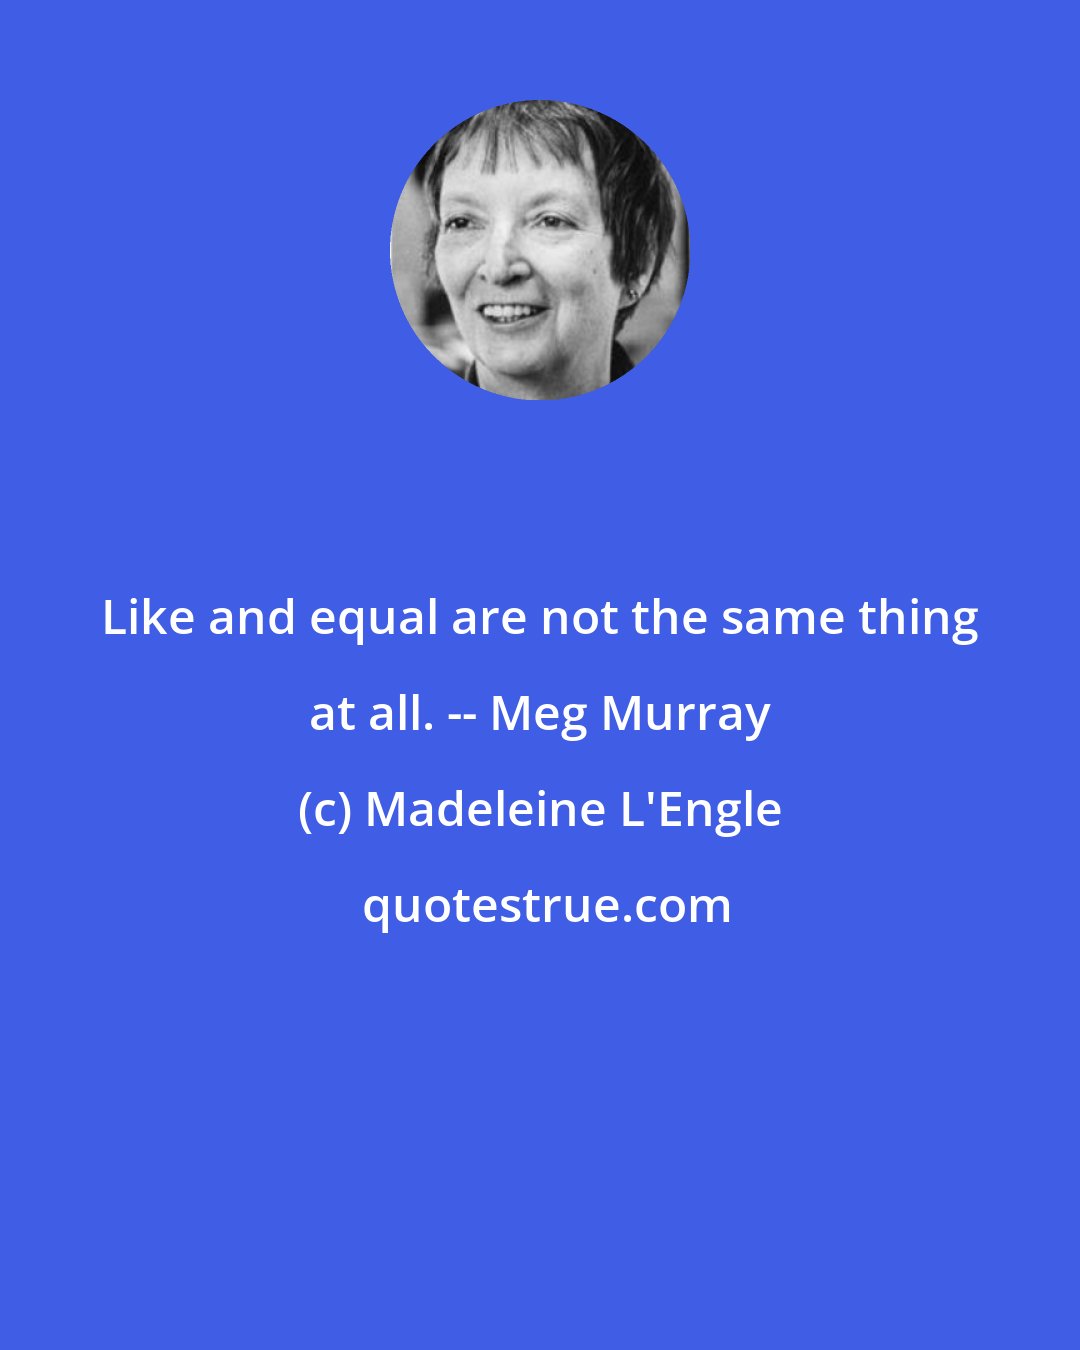 Madeleine L'Engle: Like and equal are not the same thing at all. -- Meg Murray